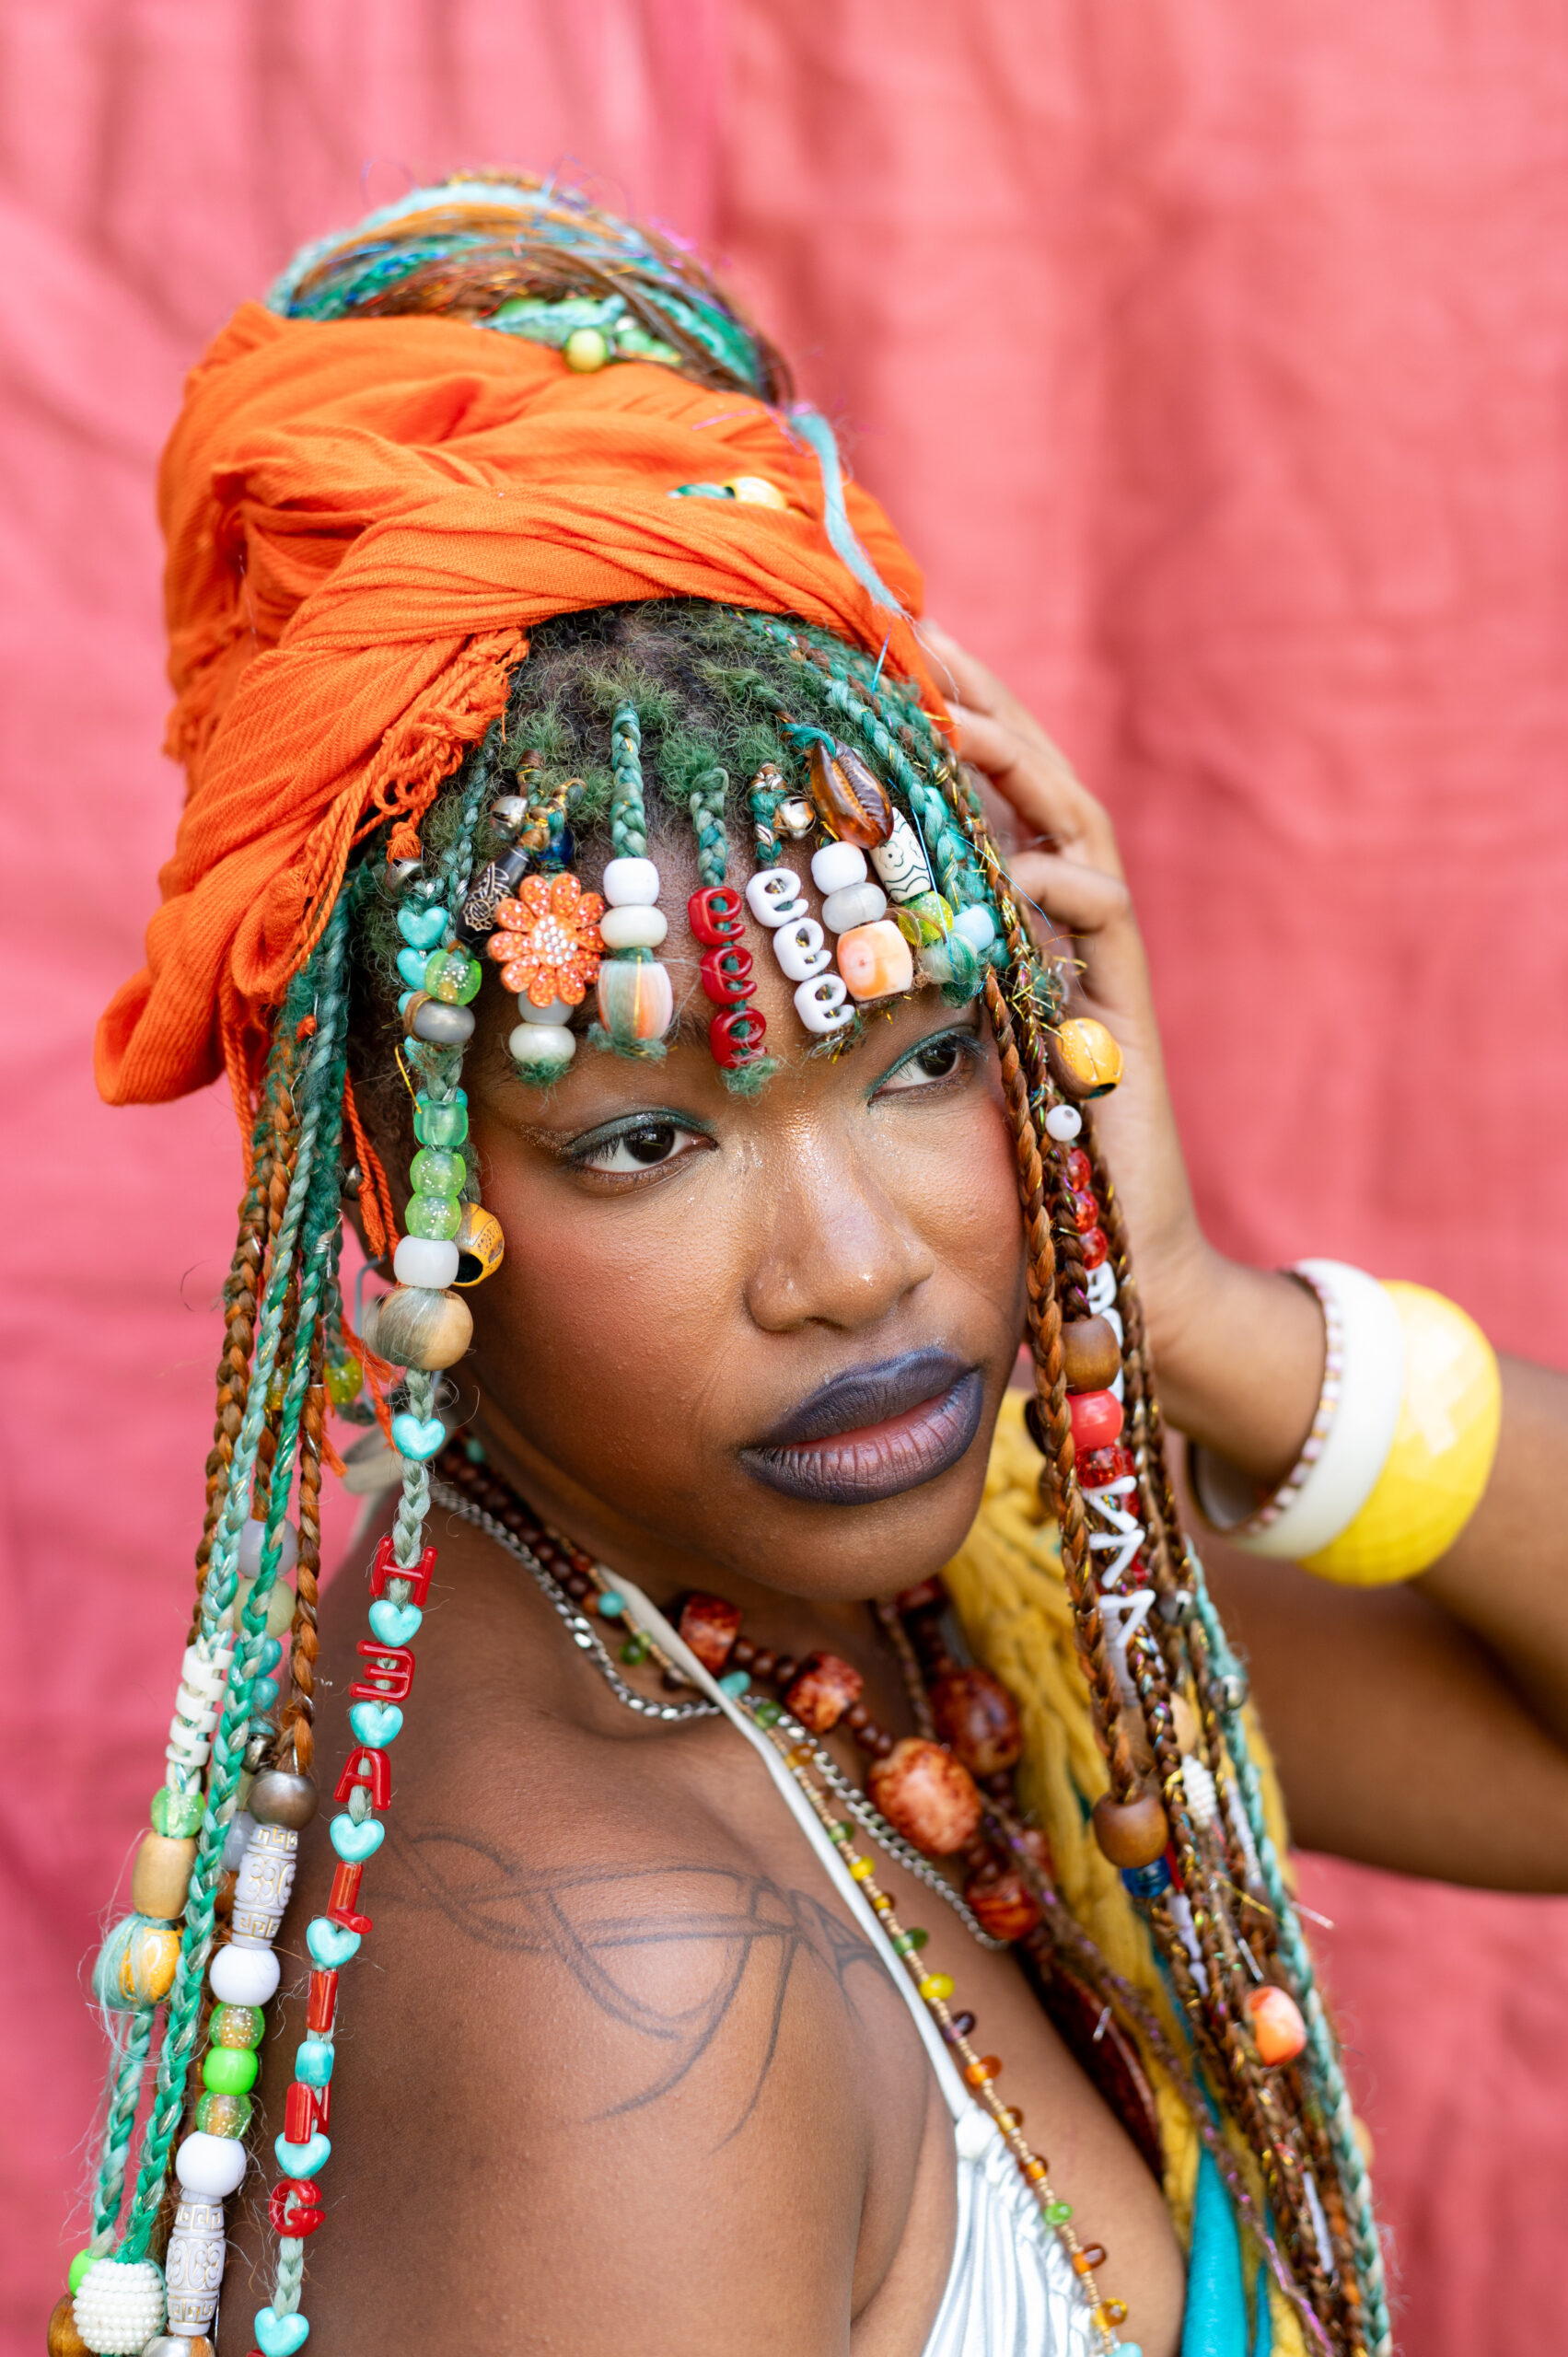 A Black woman stands in profile, looking over her right shoulder towards the photographer's right. She is wearing an orange silk scarf over her elaborately beaded locks.